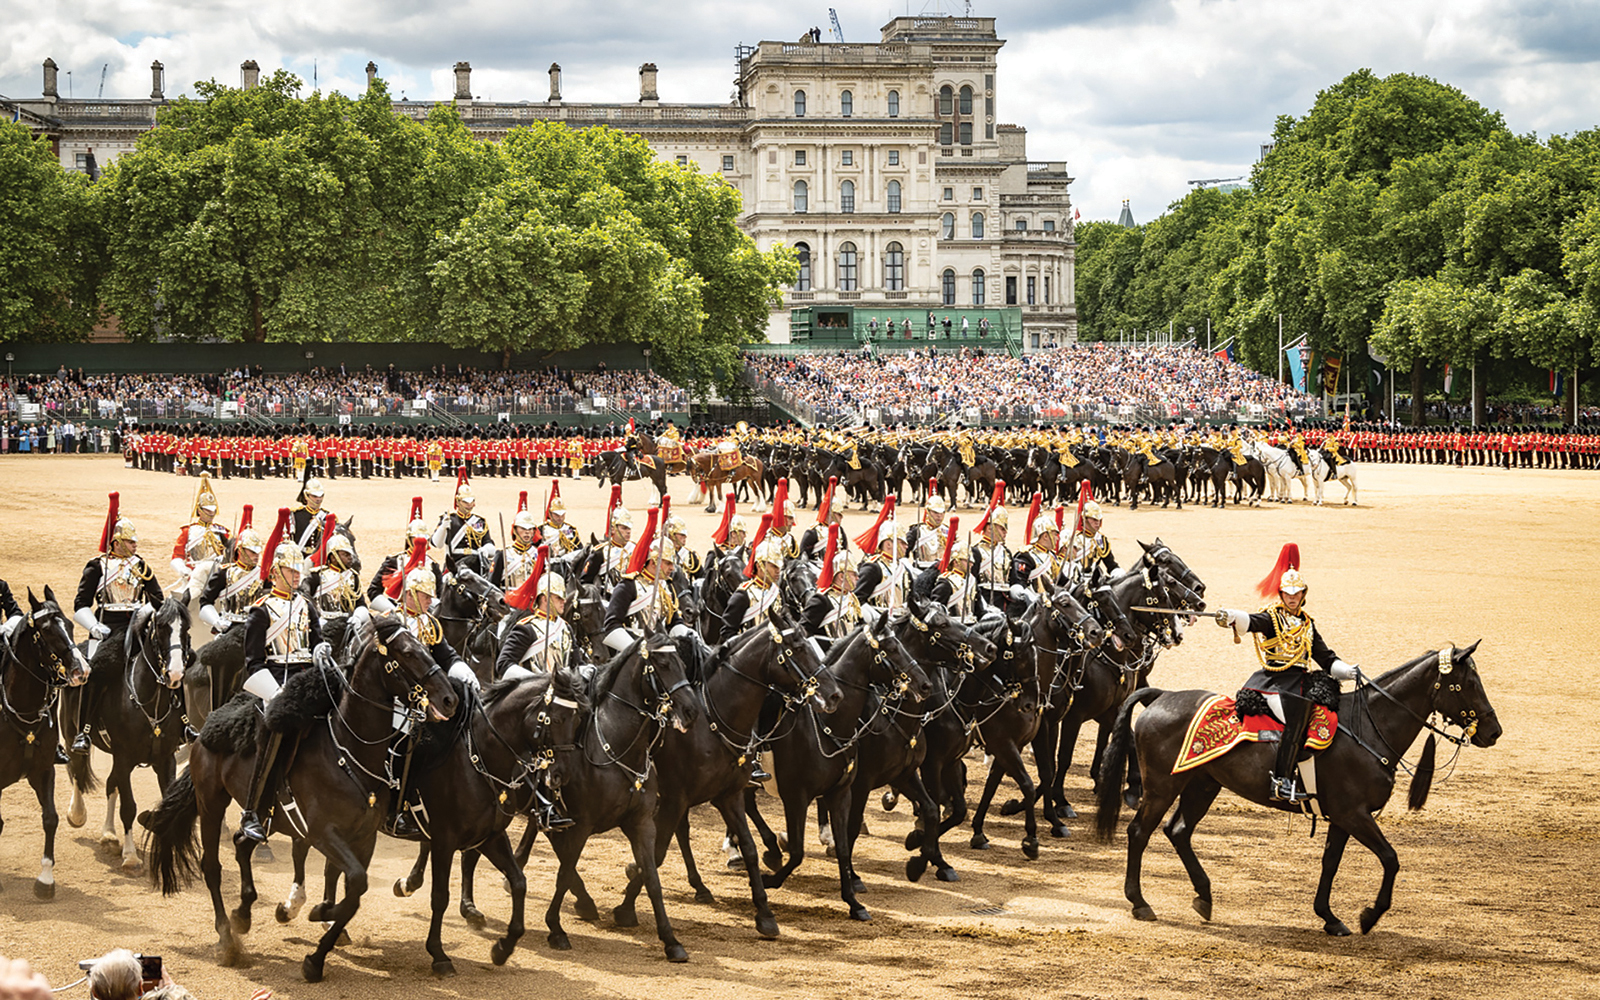 THE Trooping the Colour ceremony marked the Queens official birthday 